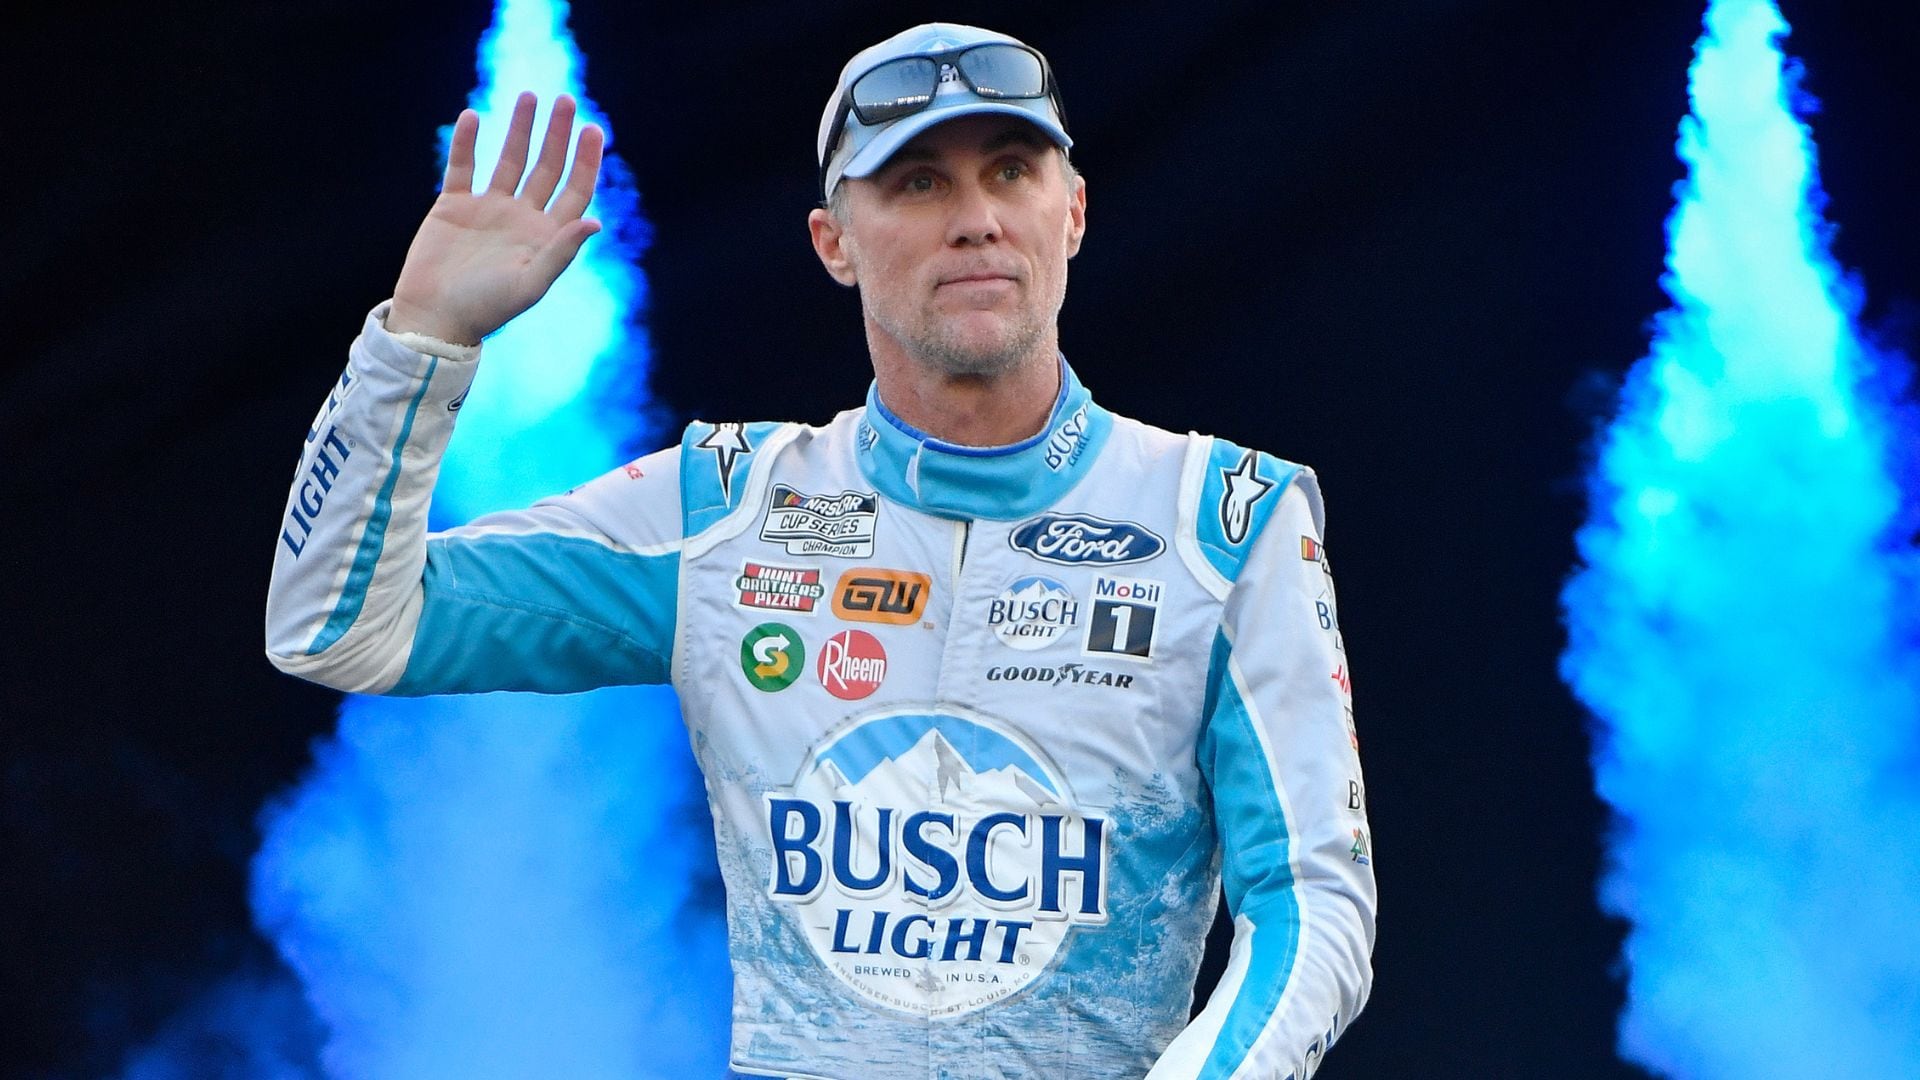 NASCAR’s Kevin Harvick to continue leaving his mark on golf post-retirement